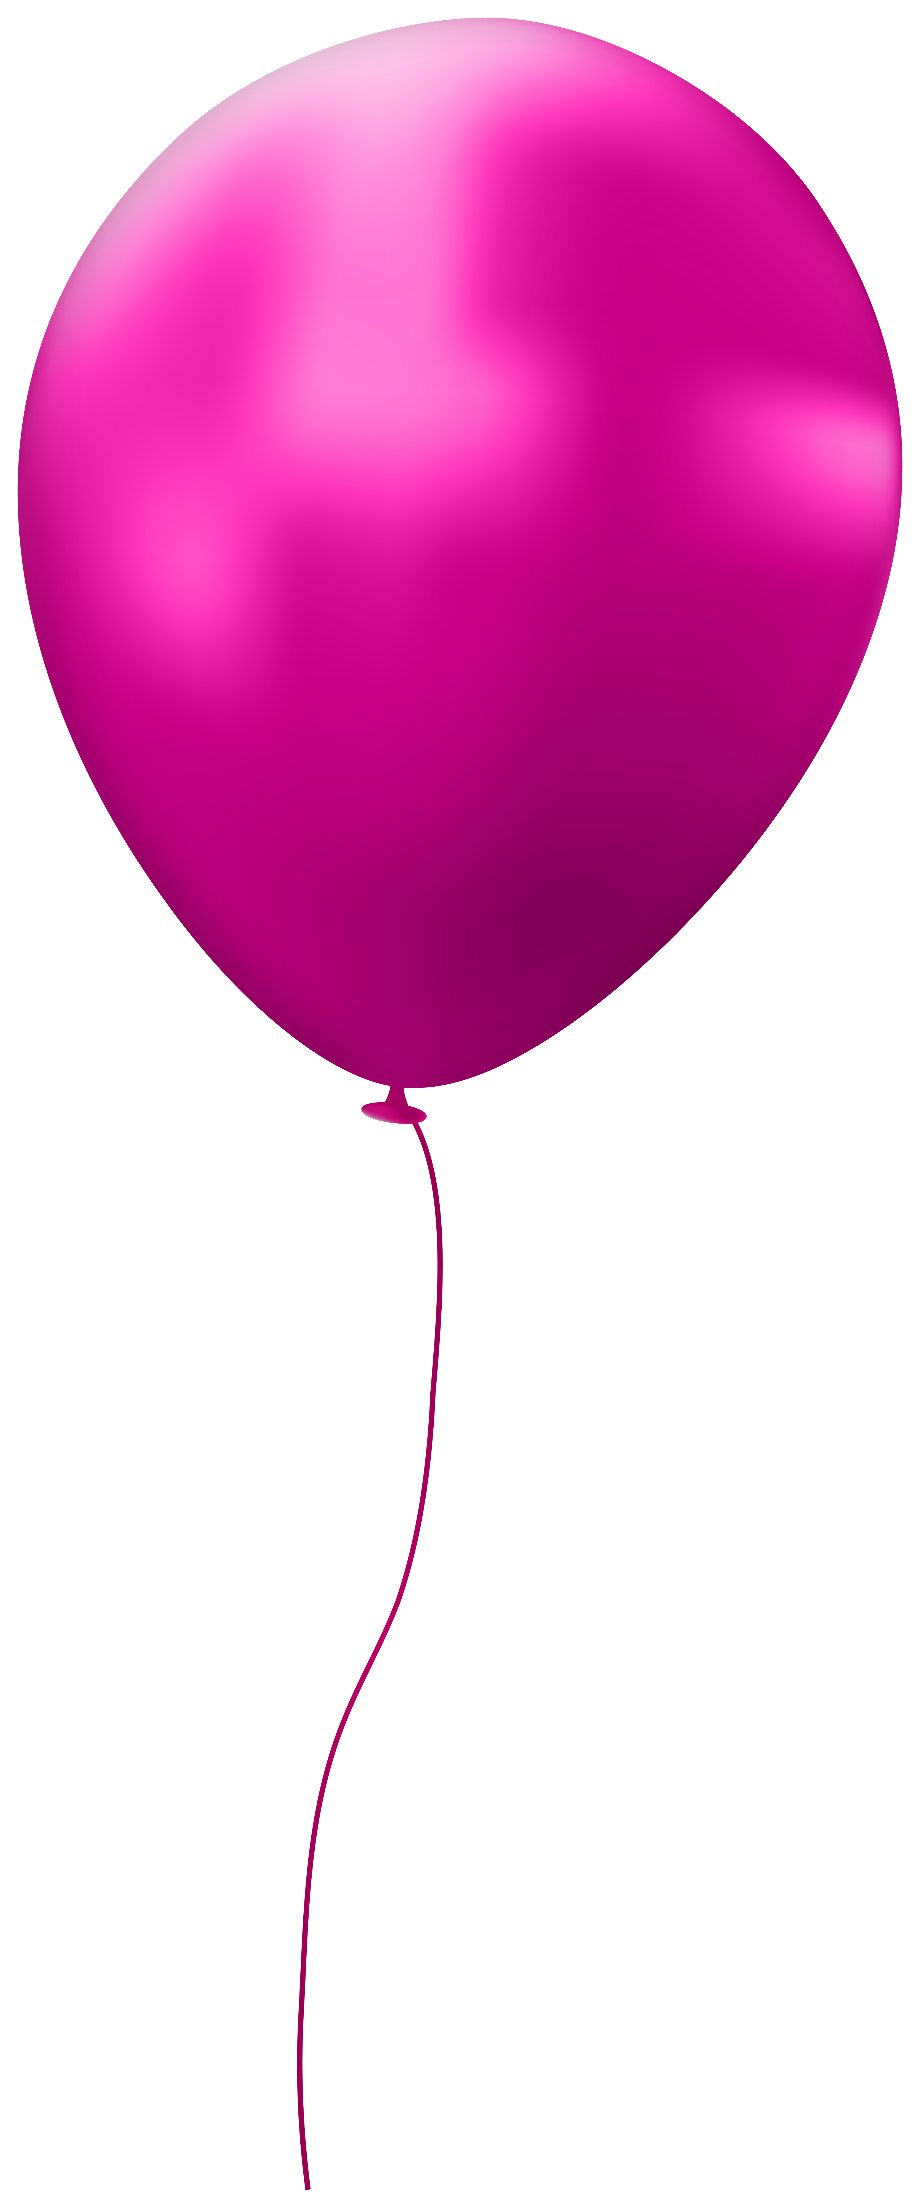 Download High Quality balloons clipart single Transparent PNG Images